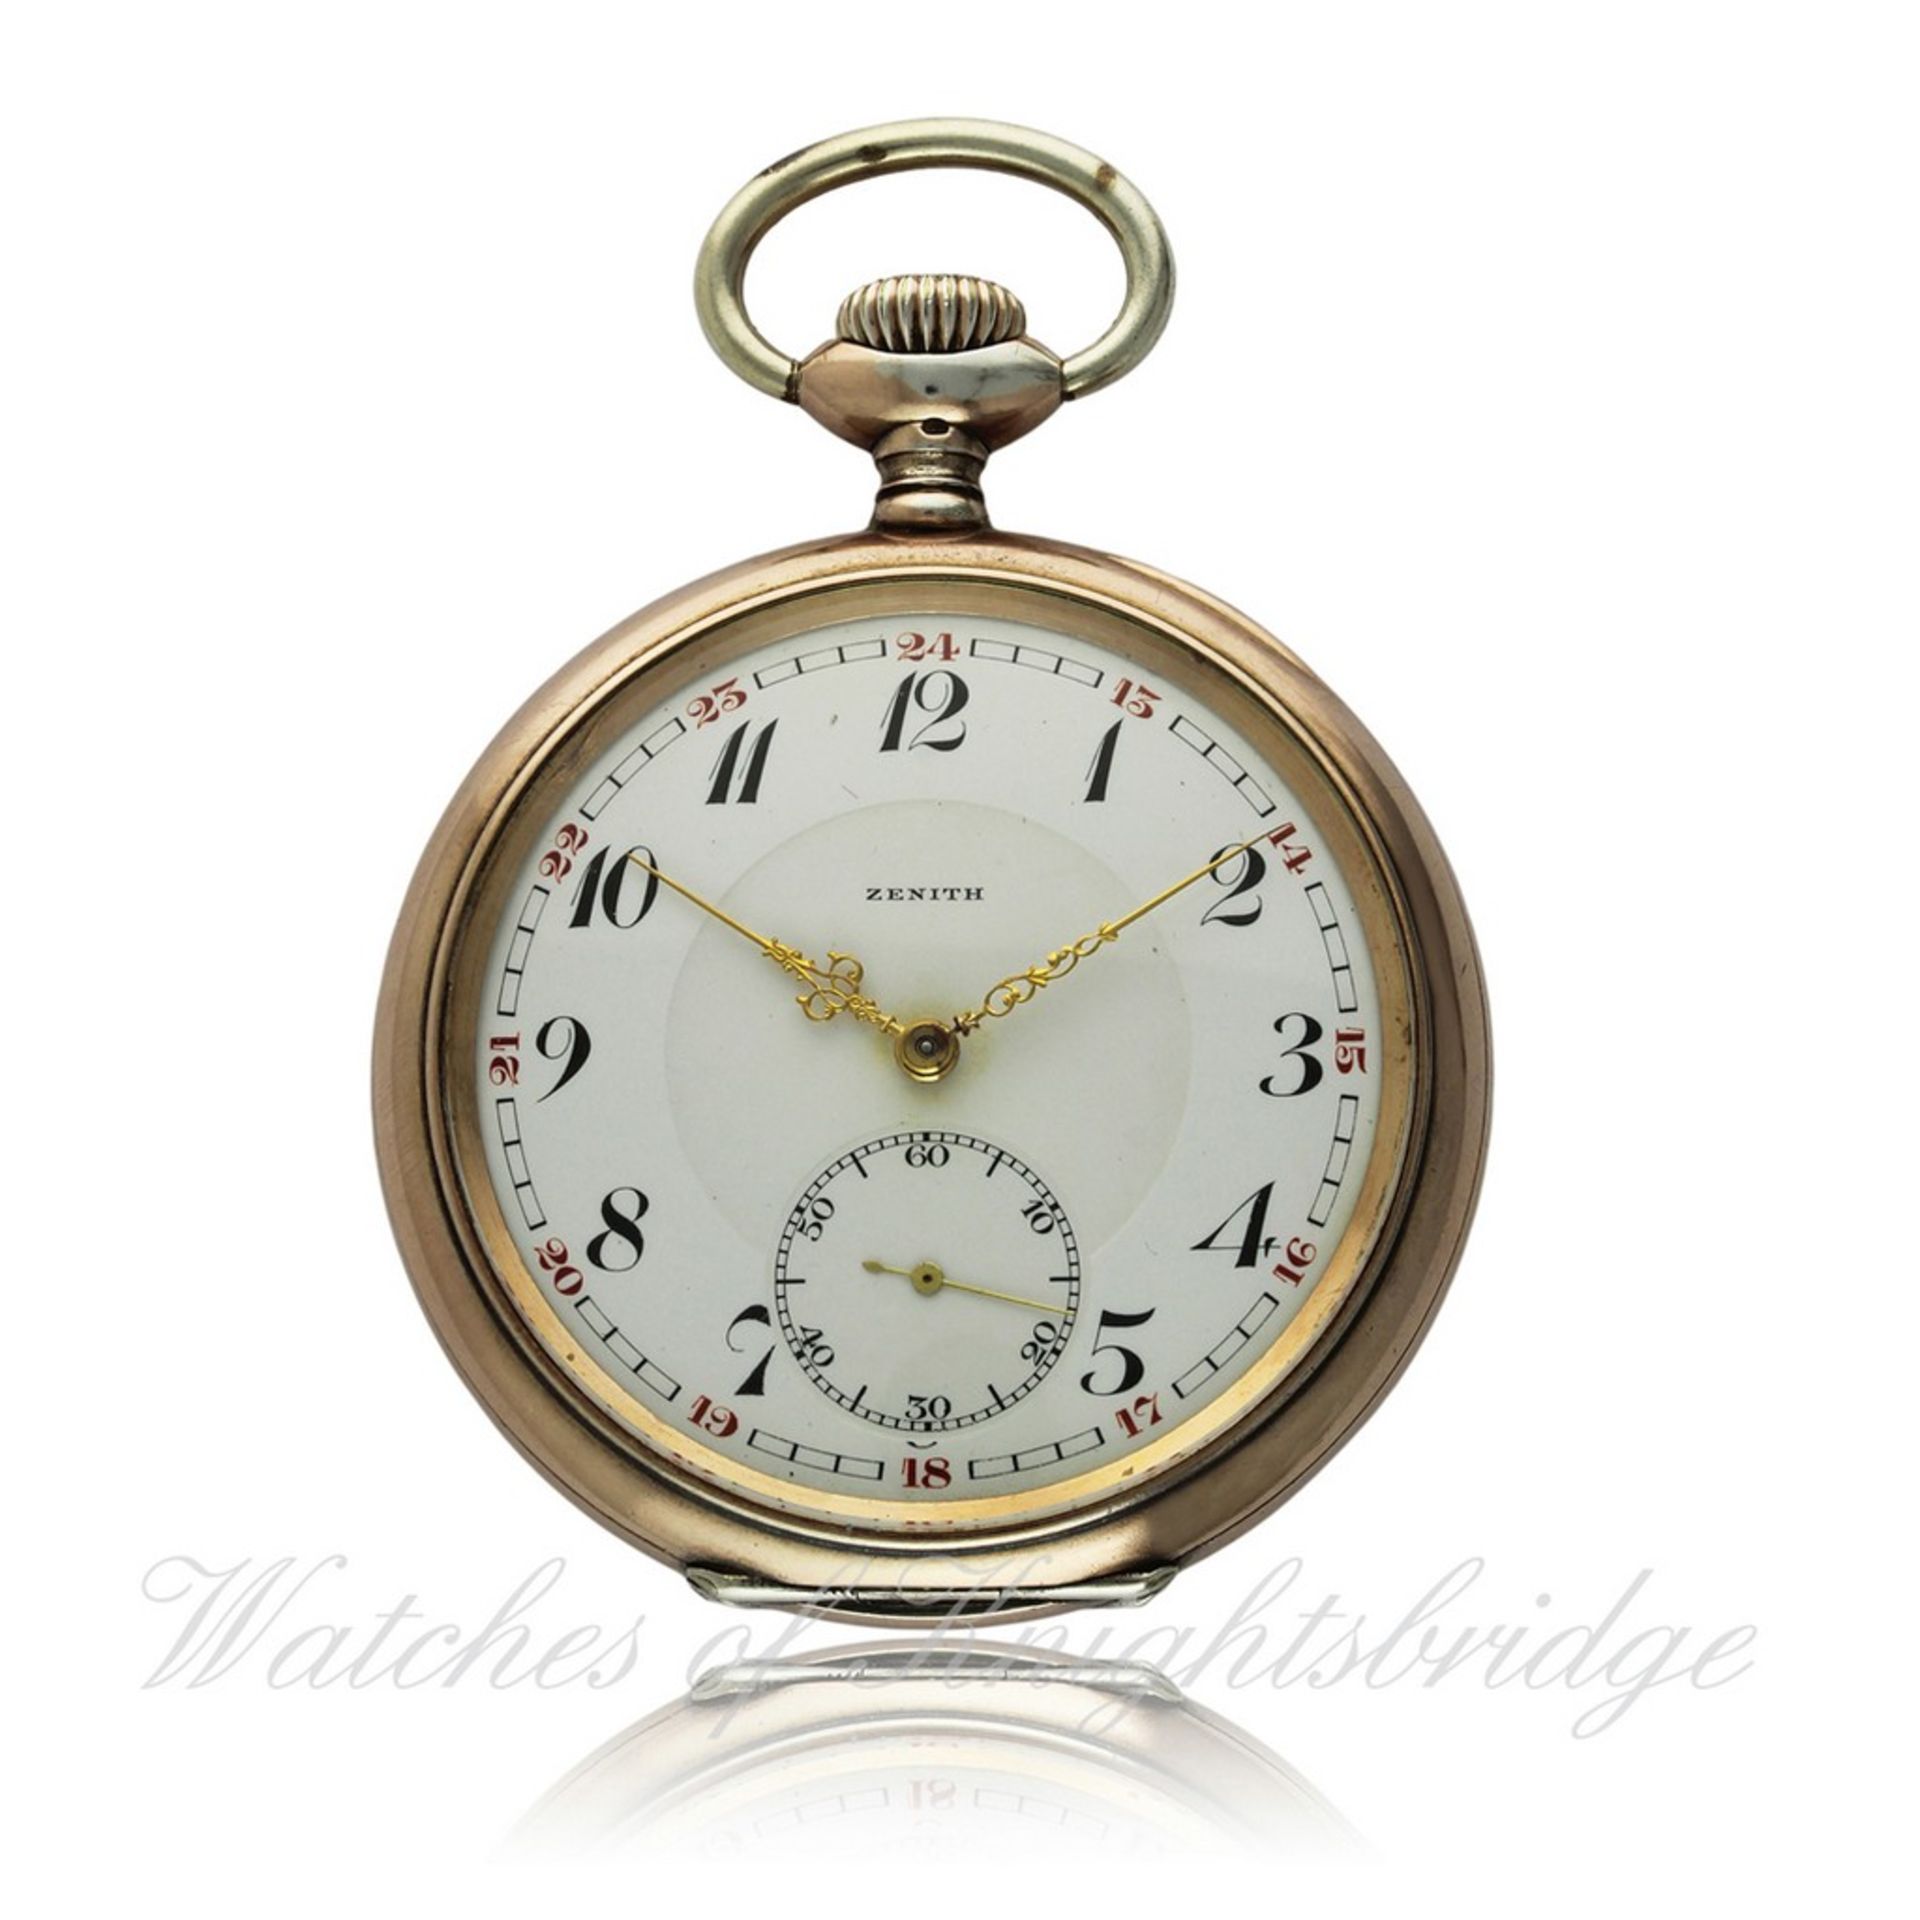 A GENTLEMAN`S SOLID SILVER & ROSE GOLD CAPPED ZENITH POCKET WATCH CIRCA 1915 D: Enamel dial with